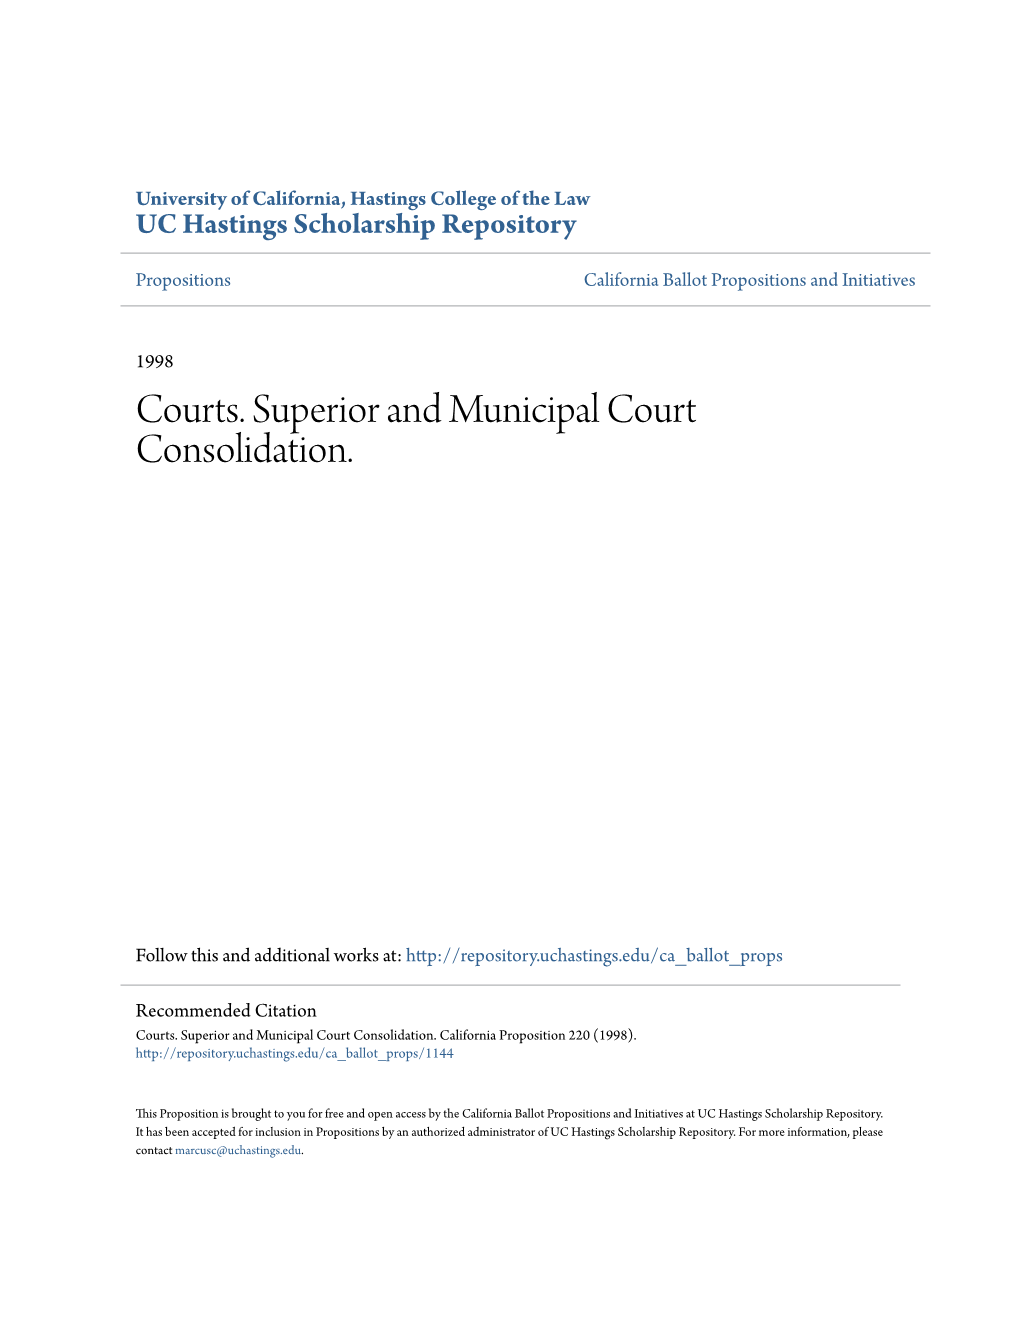 Courts. Superior and Municipal Court Consolidation